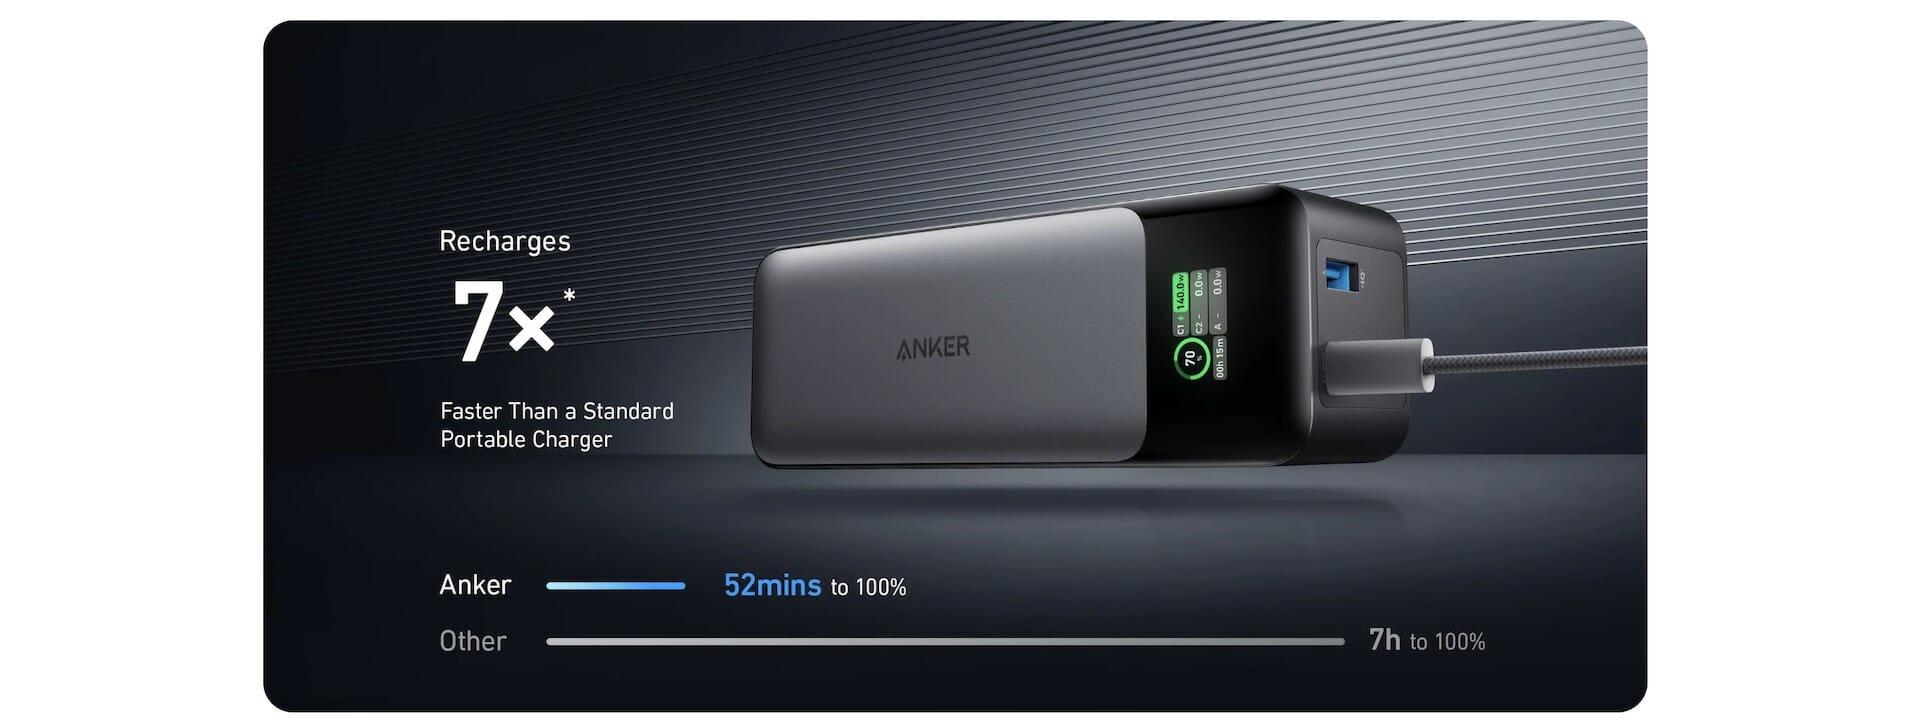 Anker released a power bank capable of quickly charging not only a smartphone, but also a laptop